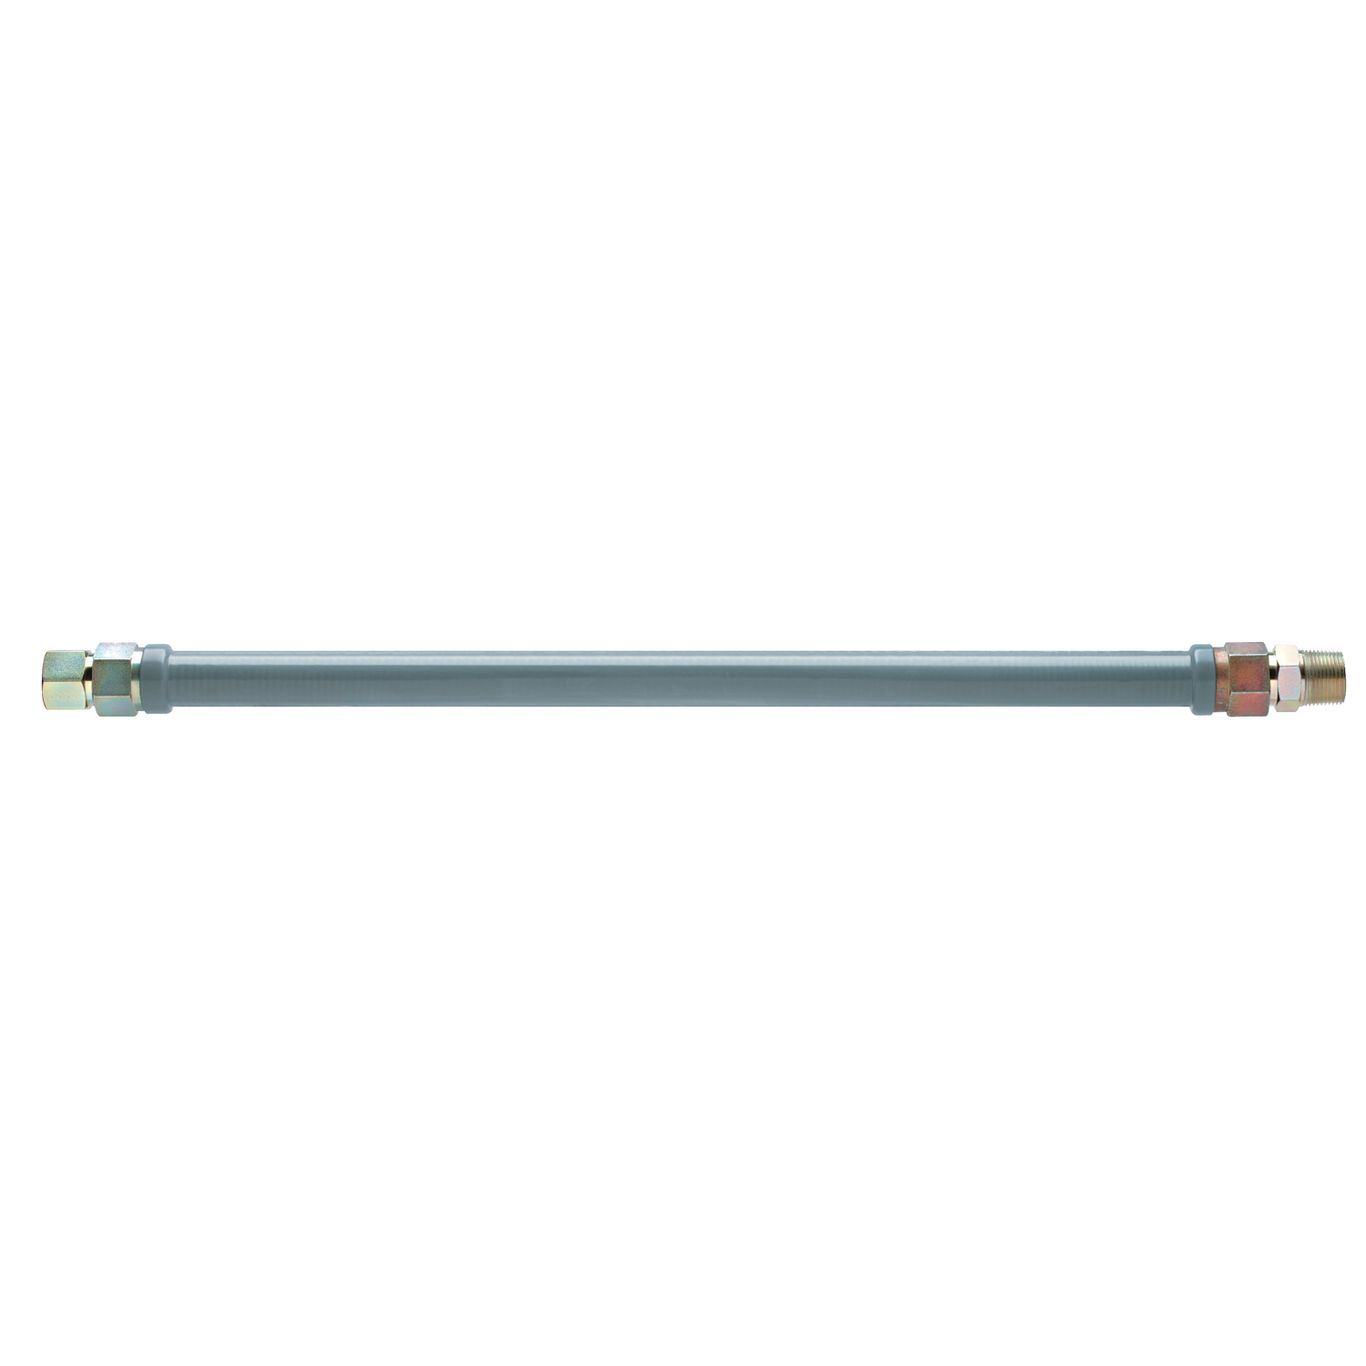 Gas Connector, 3/4 Inch Inner Dia., 3/4 Inch x 3/4 Inch Size, 12 Inch Length